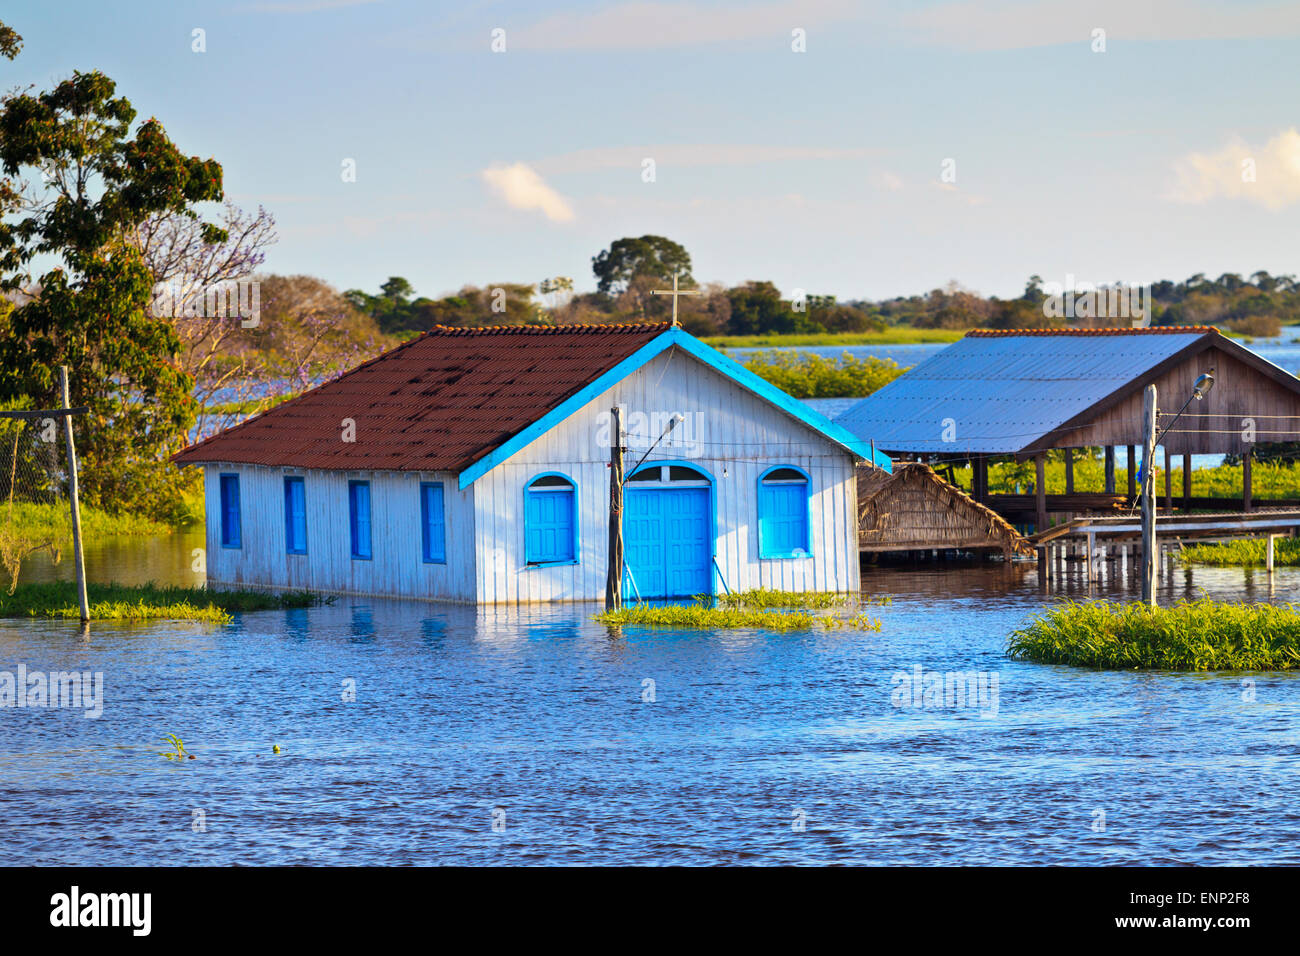 Colorful flooded church in a village on the Amazon river in Brazil Stock Photo